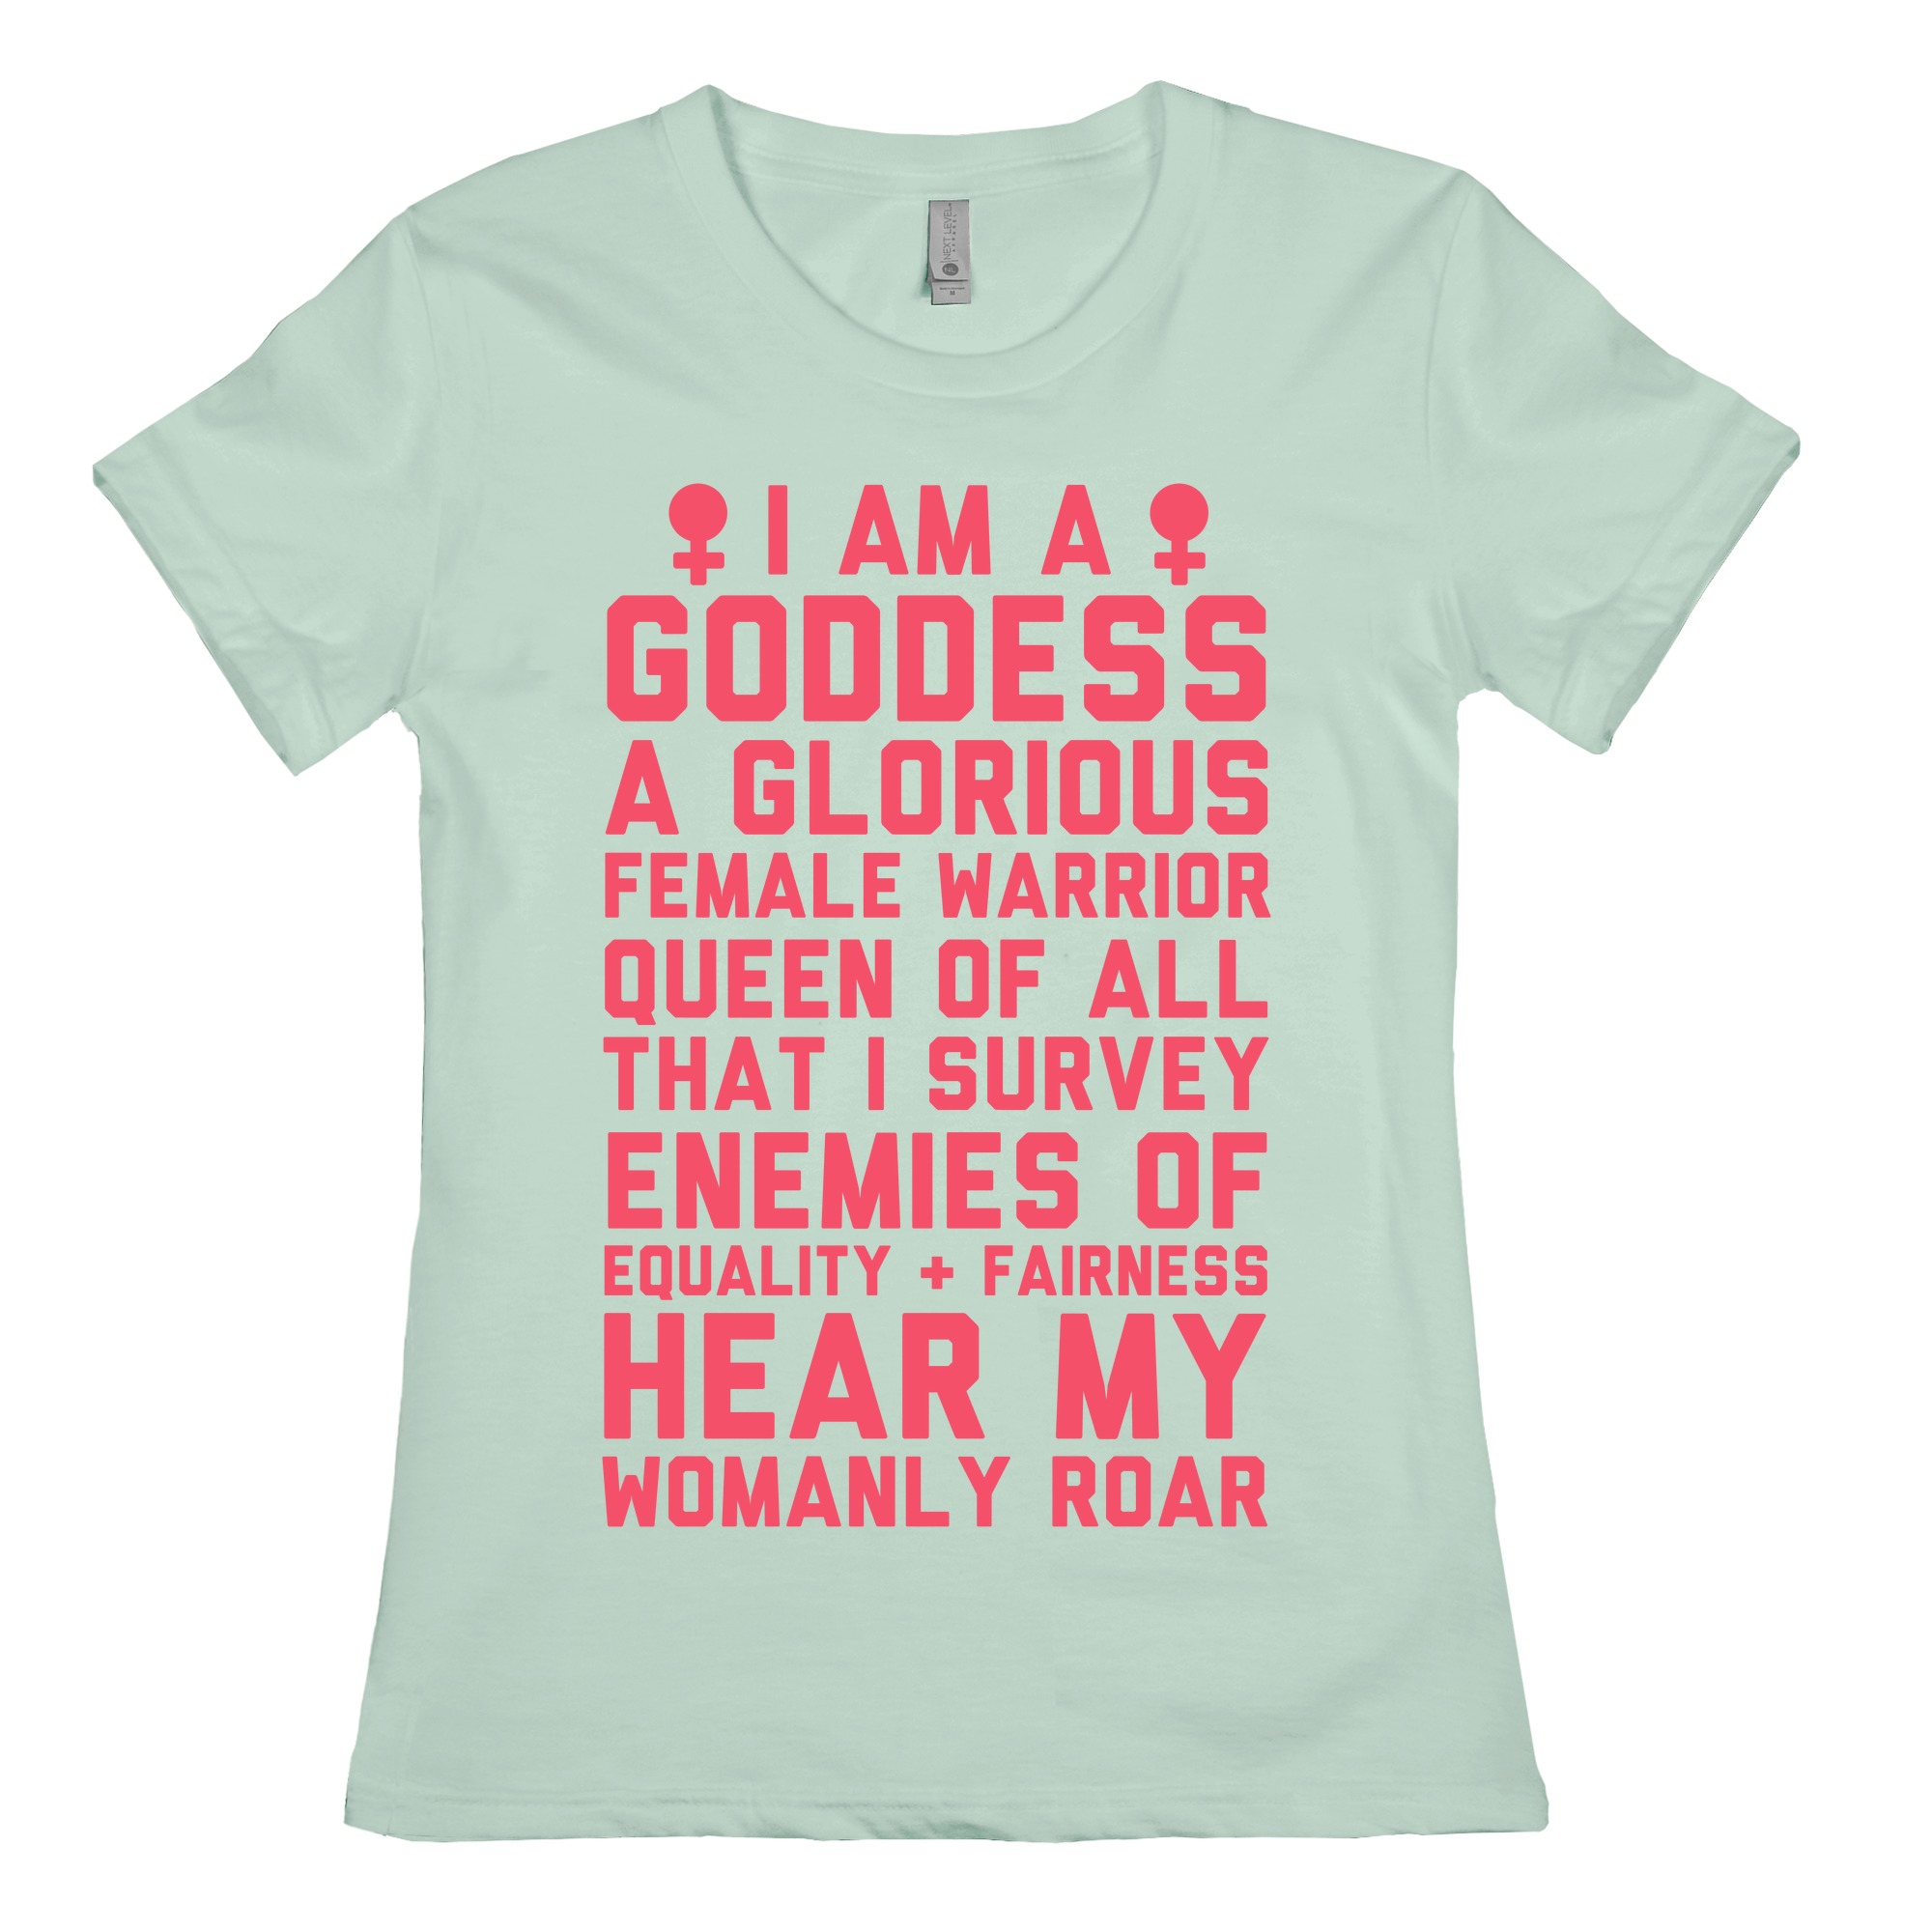 CHOORO Parks and Rec Pawnee Goddesses Gift I Am a Goddess a Glorious Female Warrior Queen of All That I Survey Keychain